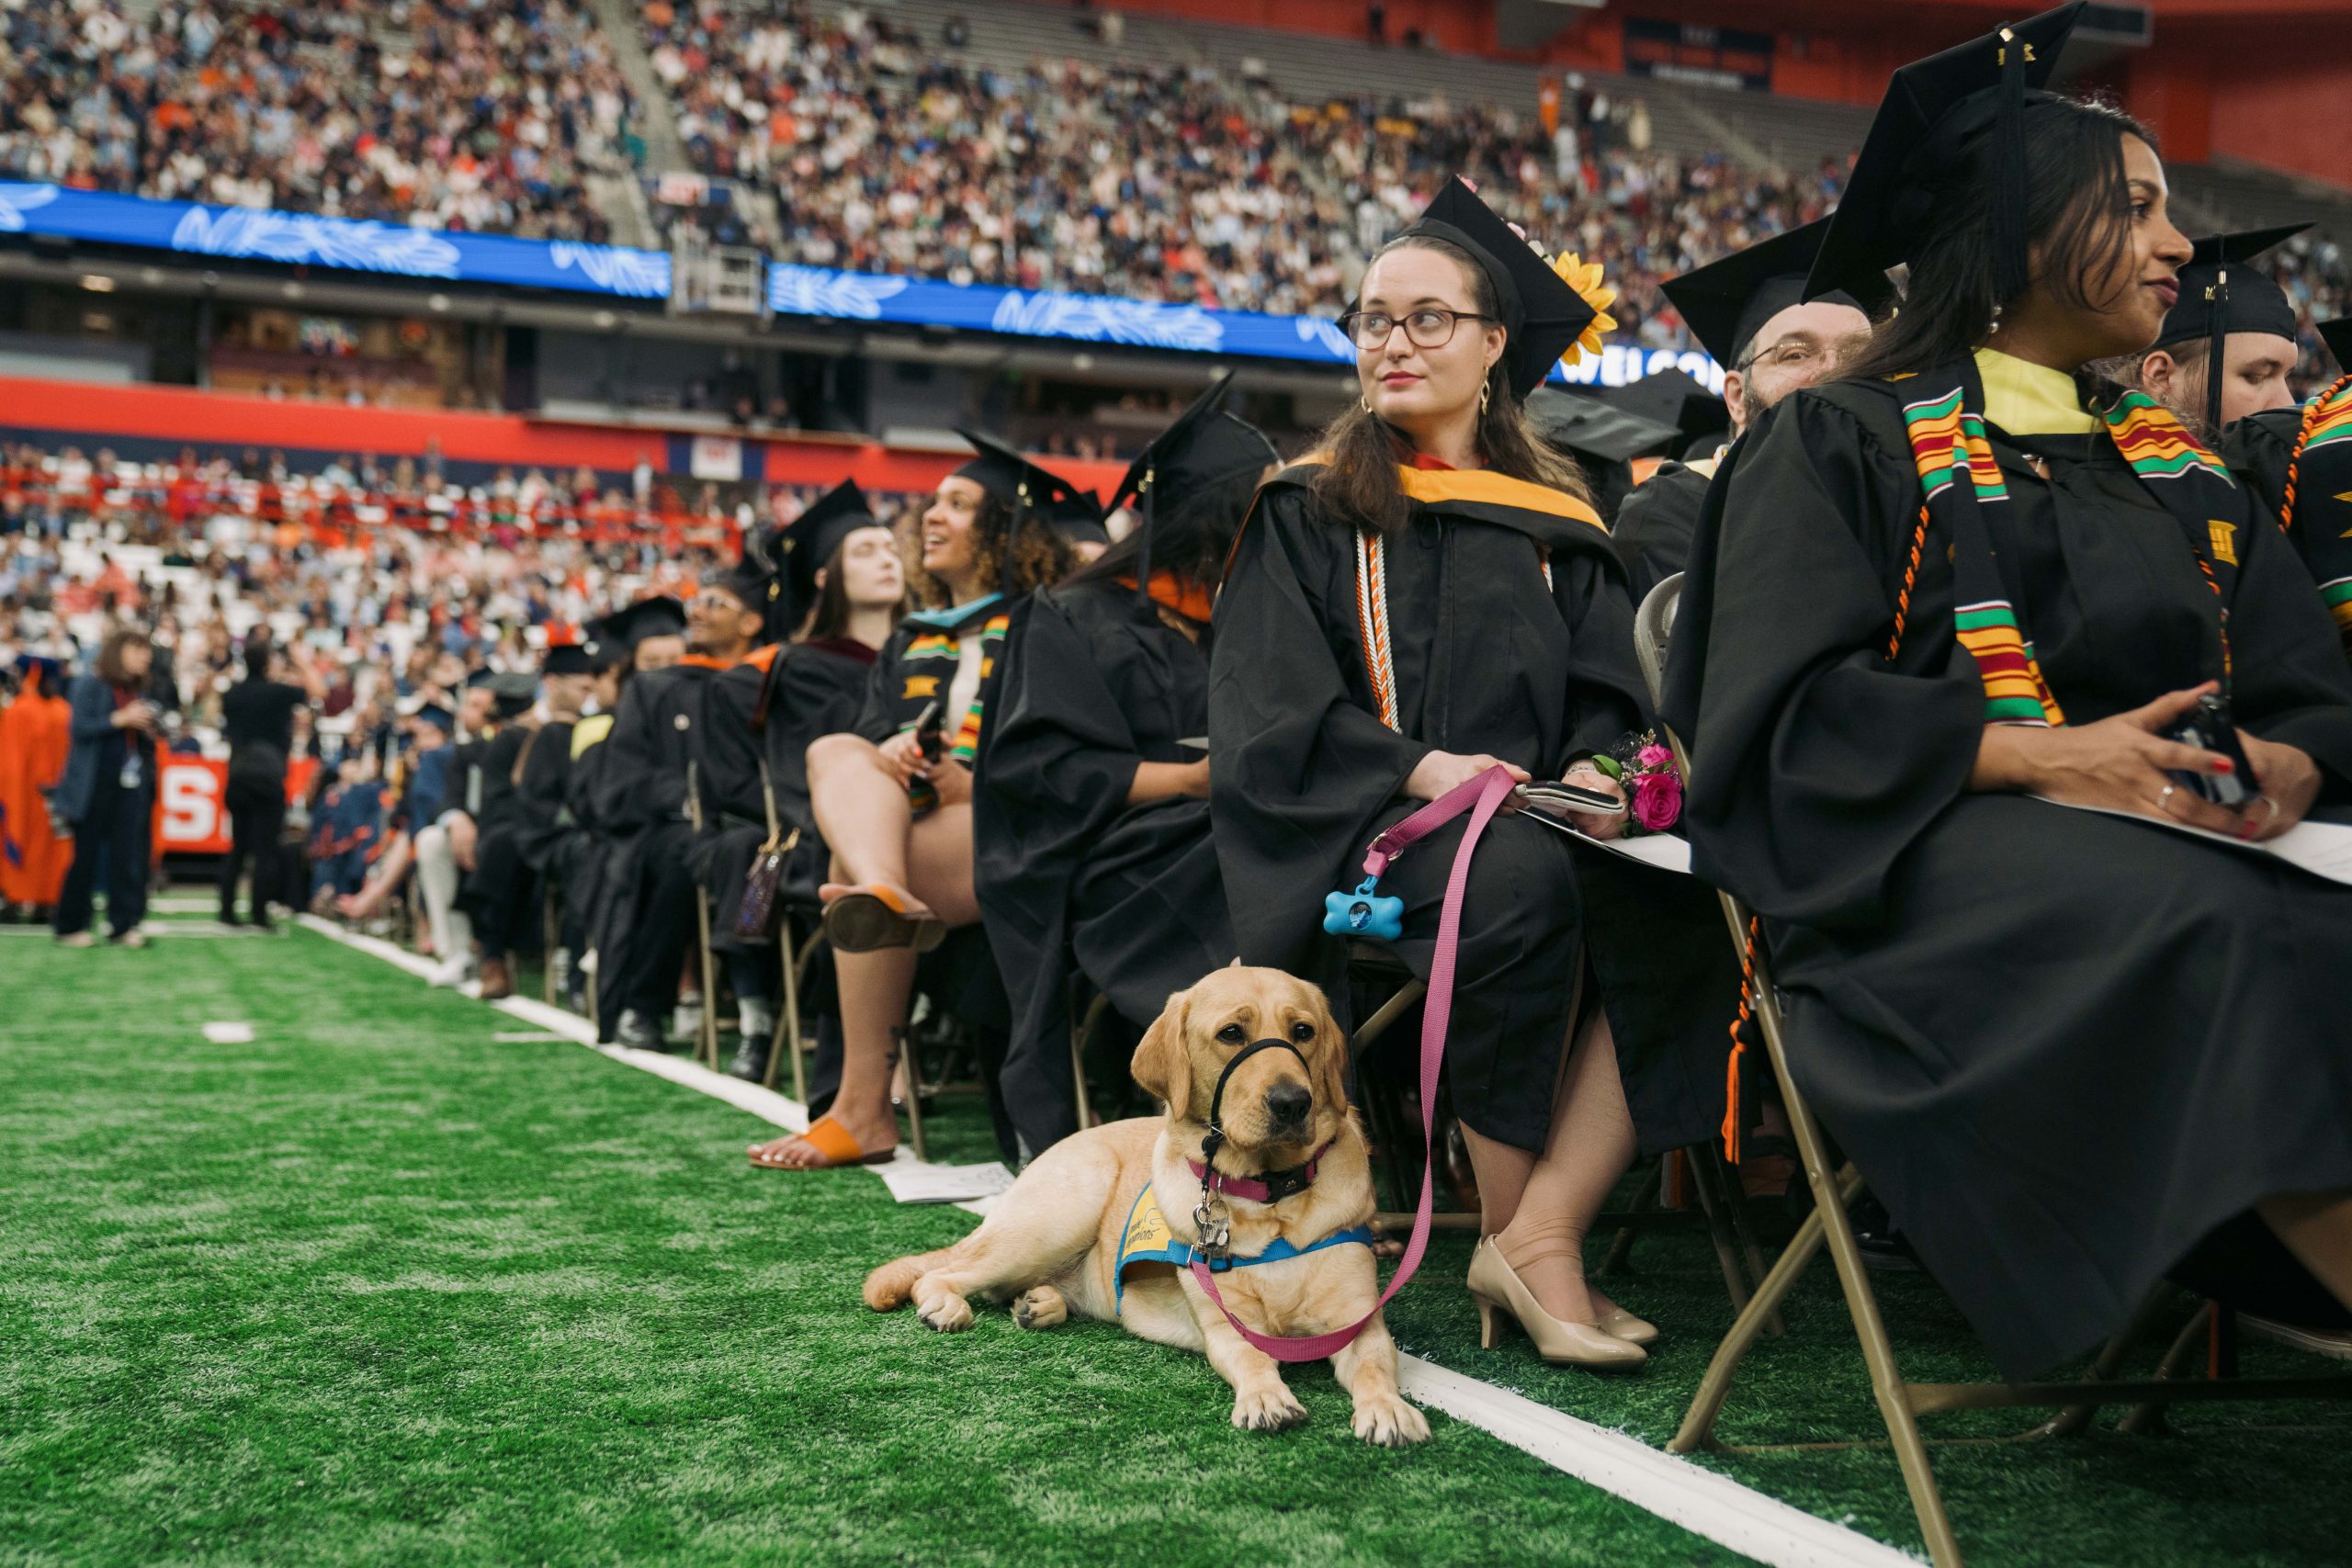 Service dog sitting next to their owner at Commencement